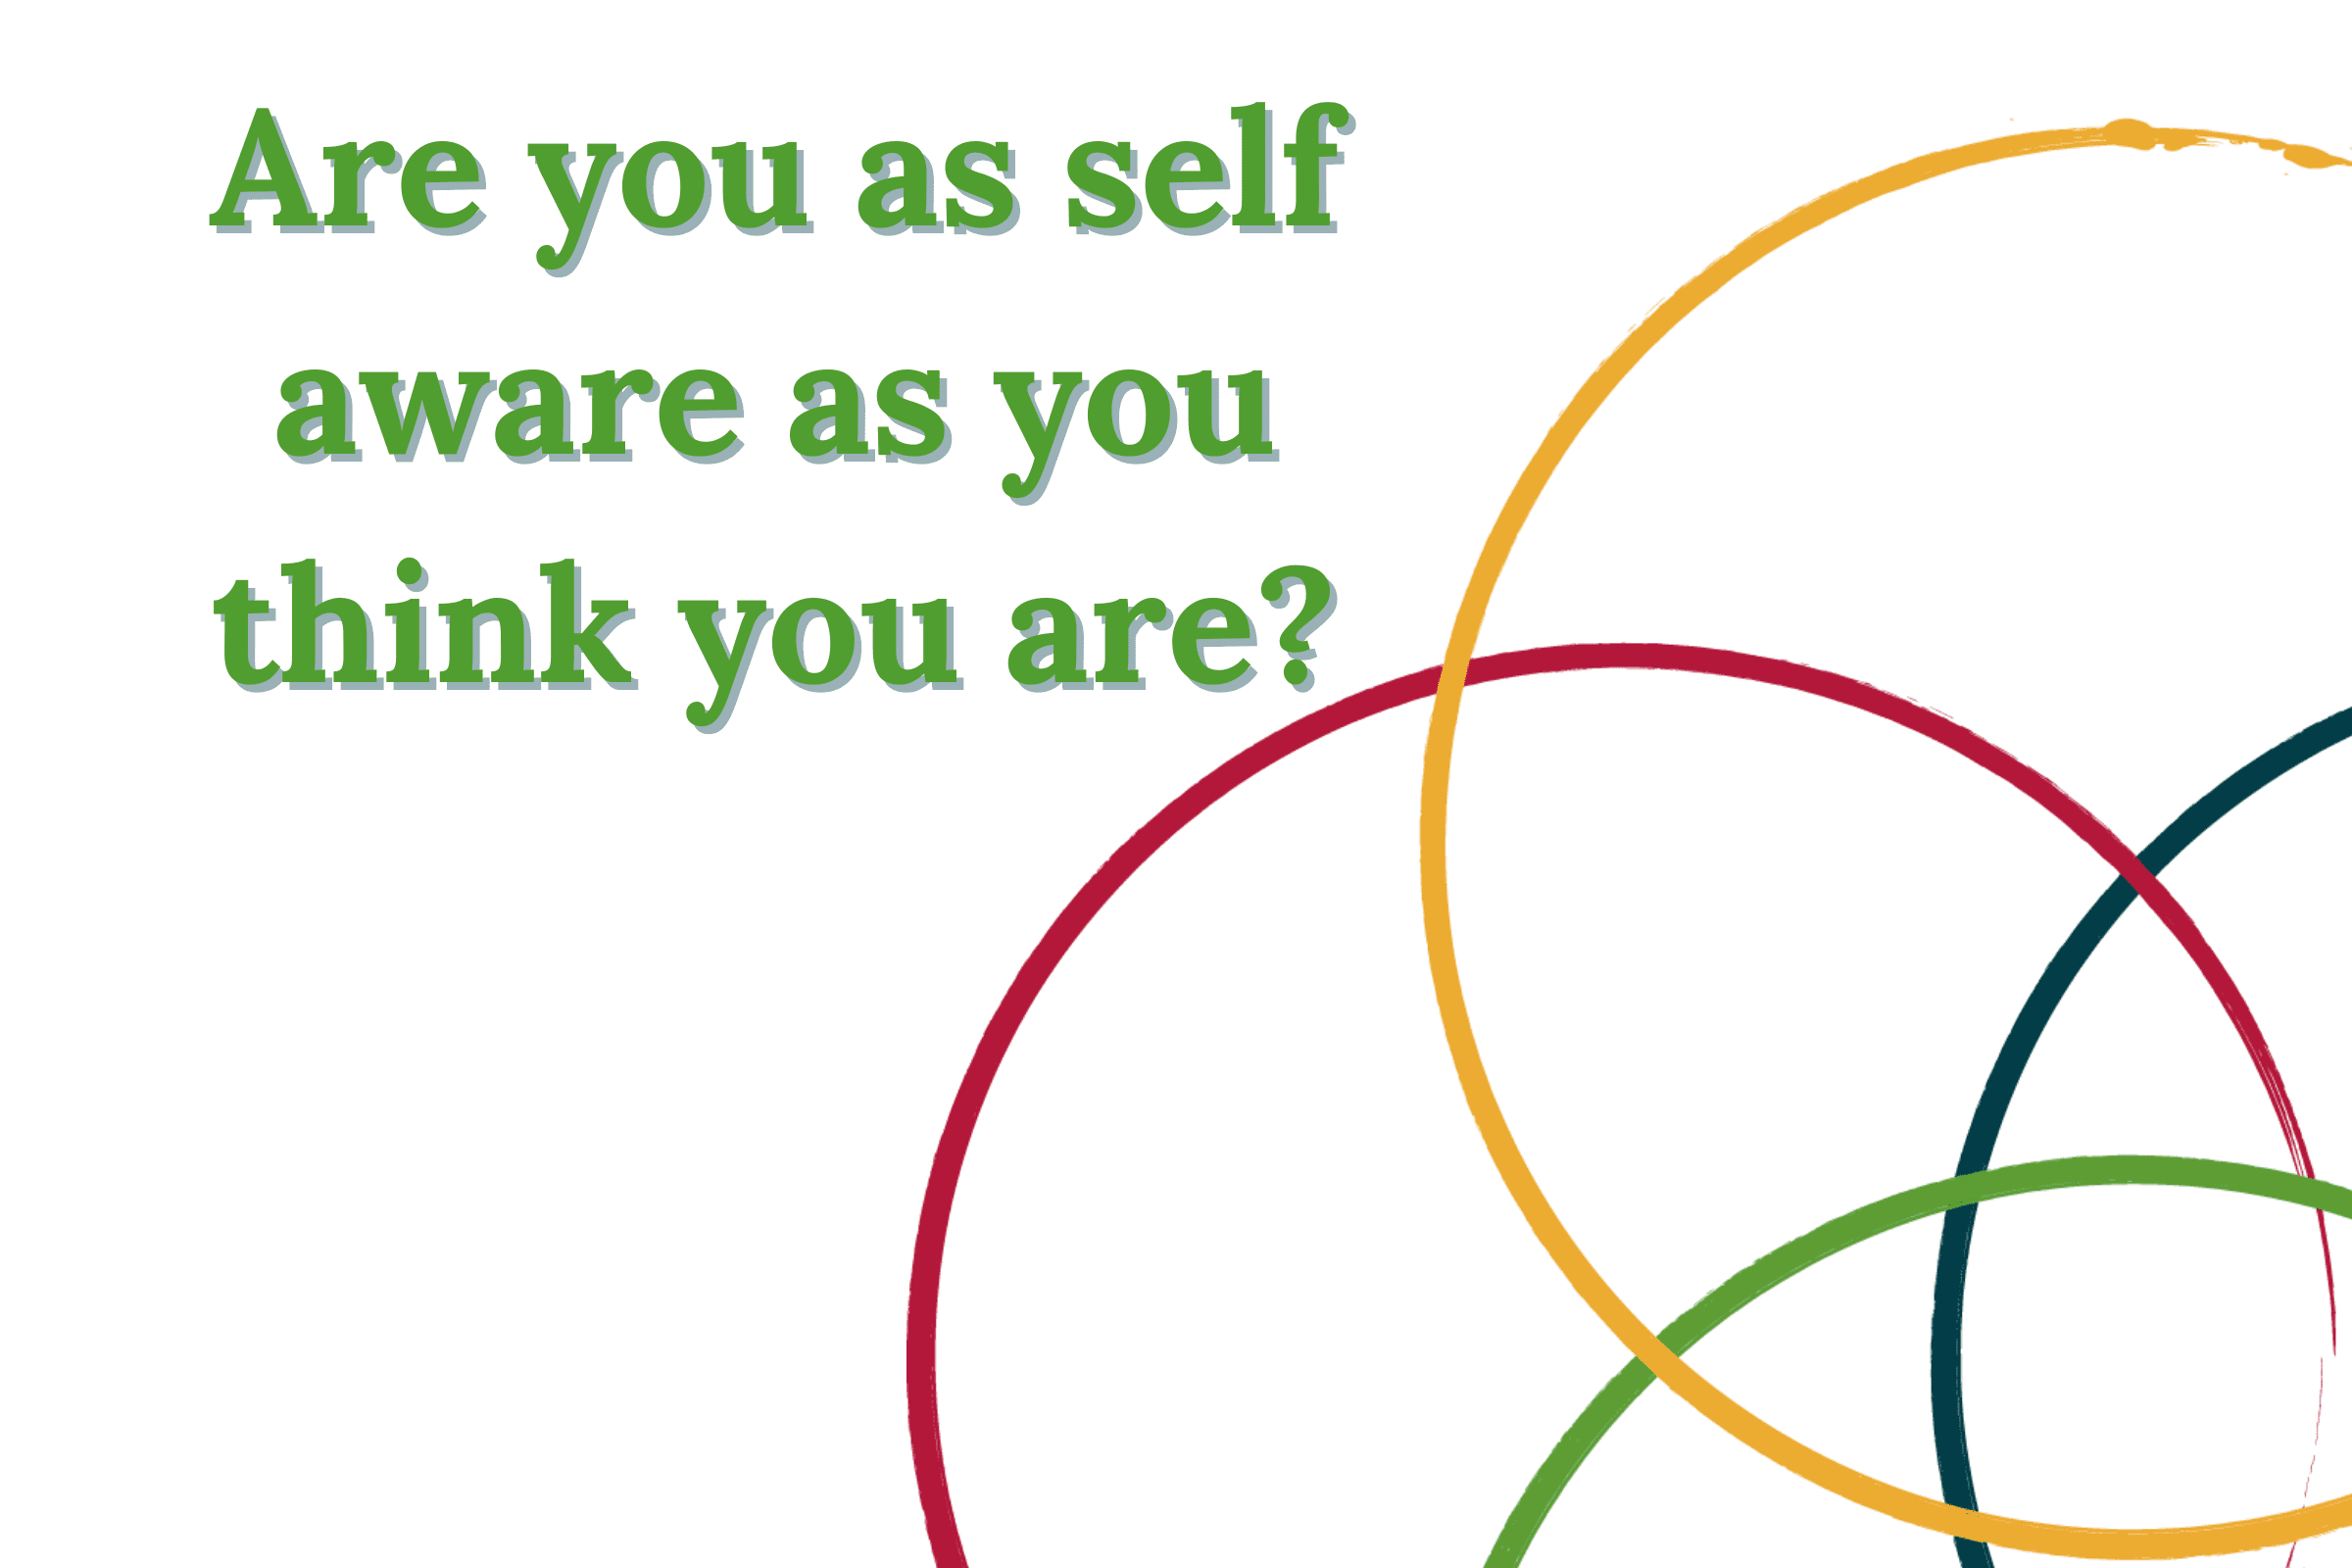 Are you as self aware as you think you are?